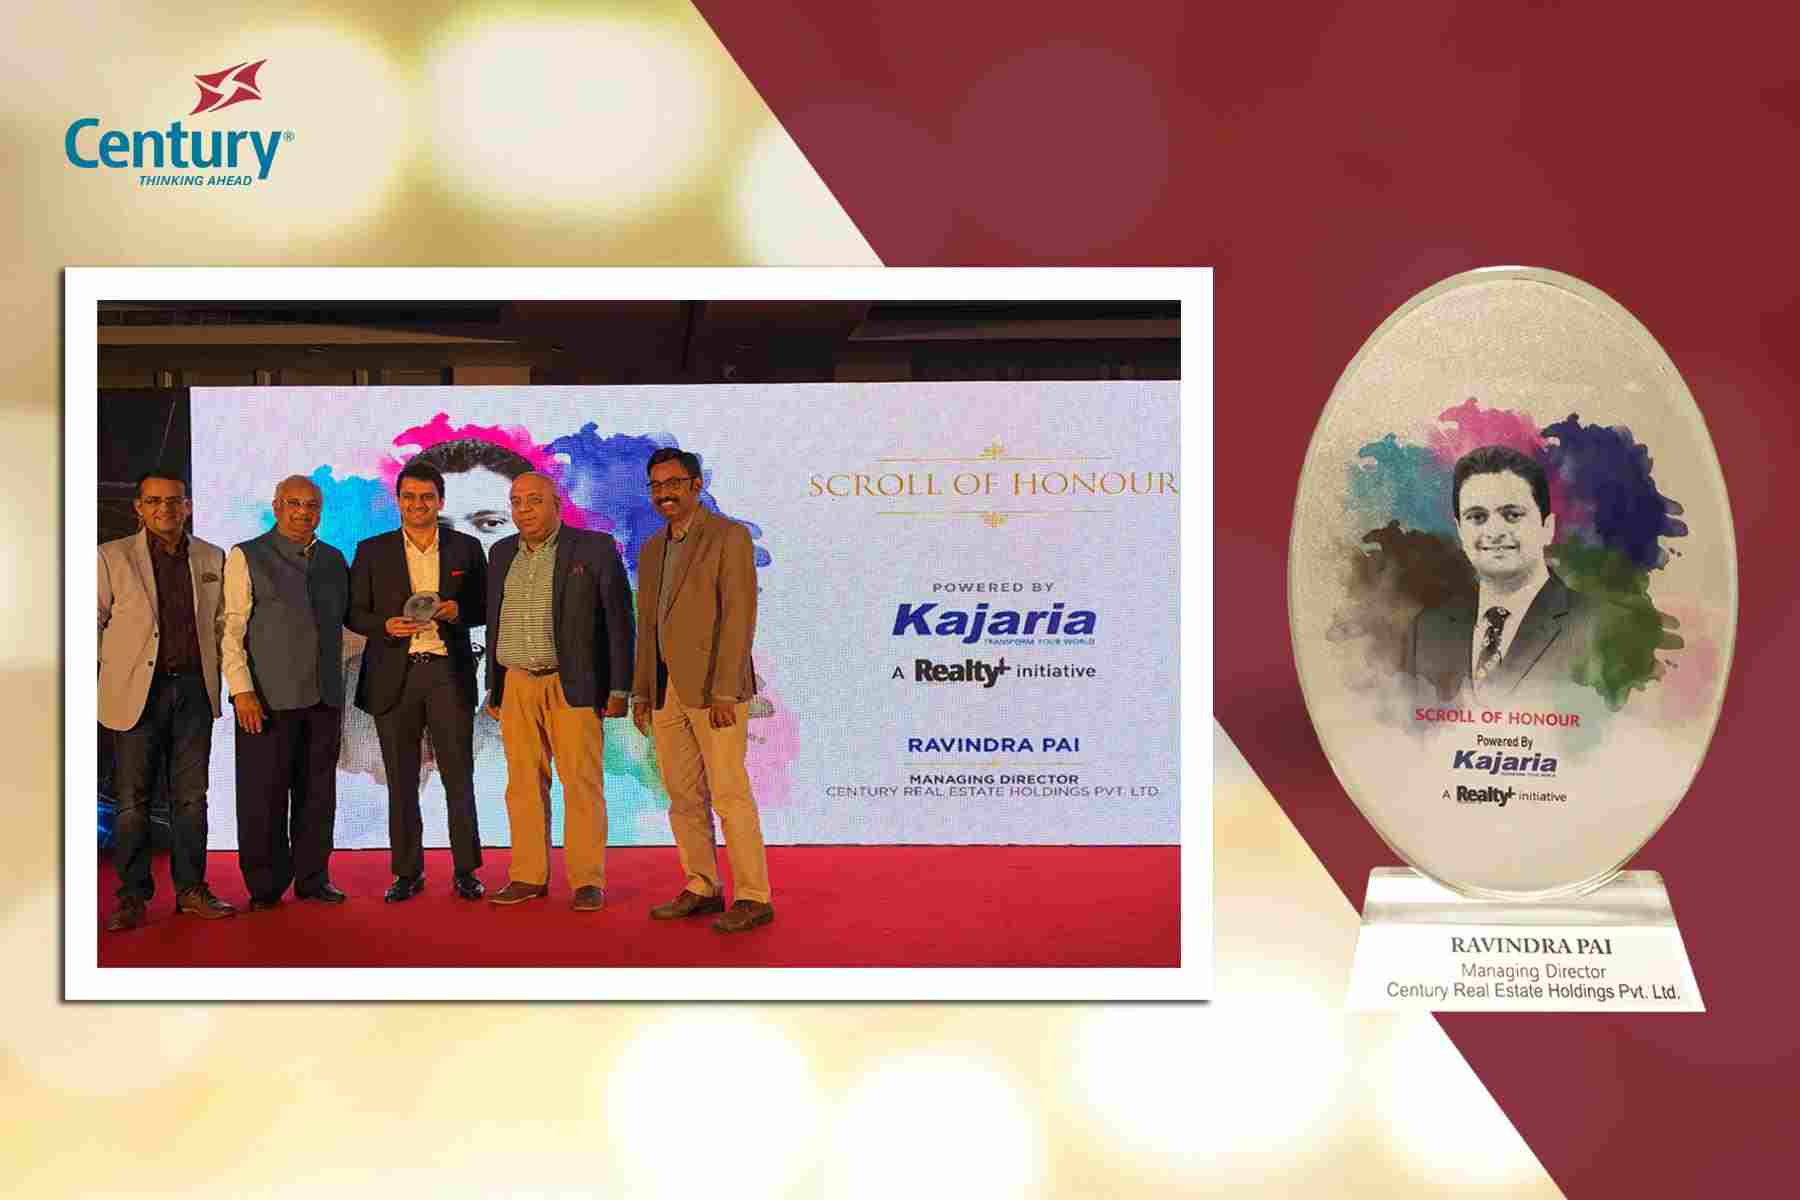 Mr. P. Ravindra Pai awarded the Scroll of Honour by Realty Plus Media Update